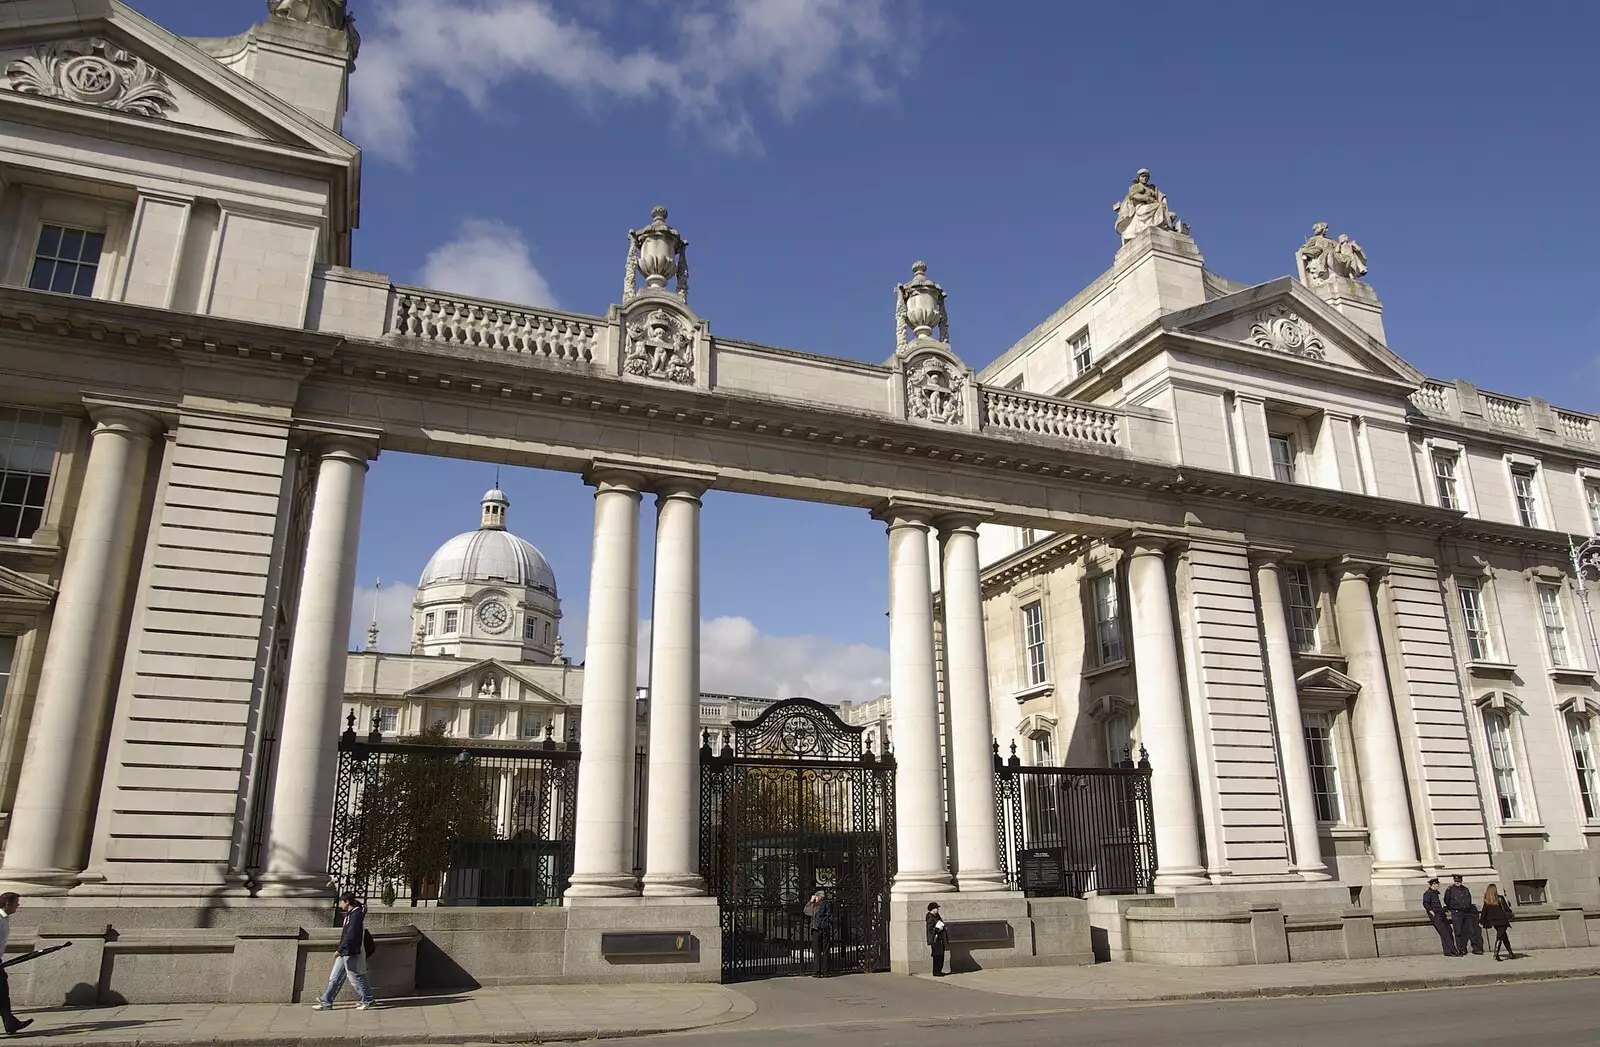 The government buildings on Merrion Street, from Blackrock and Dublin, Ireland - 24th September 2007